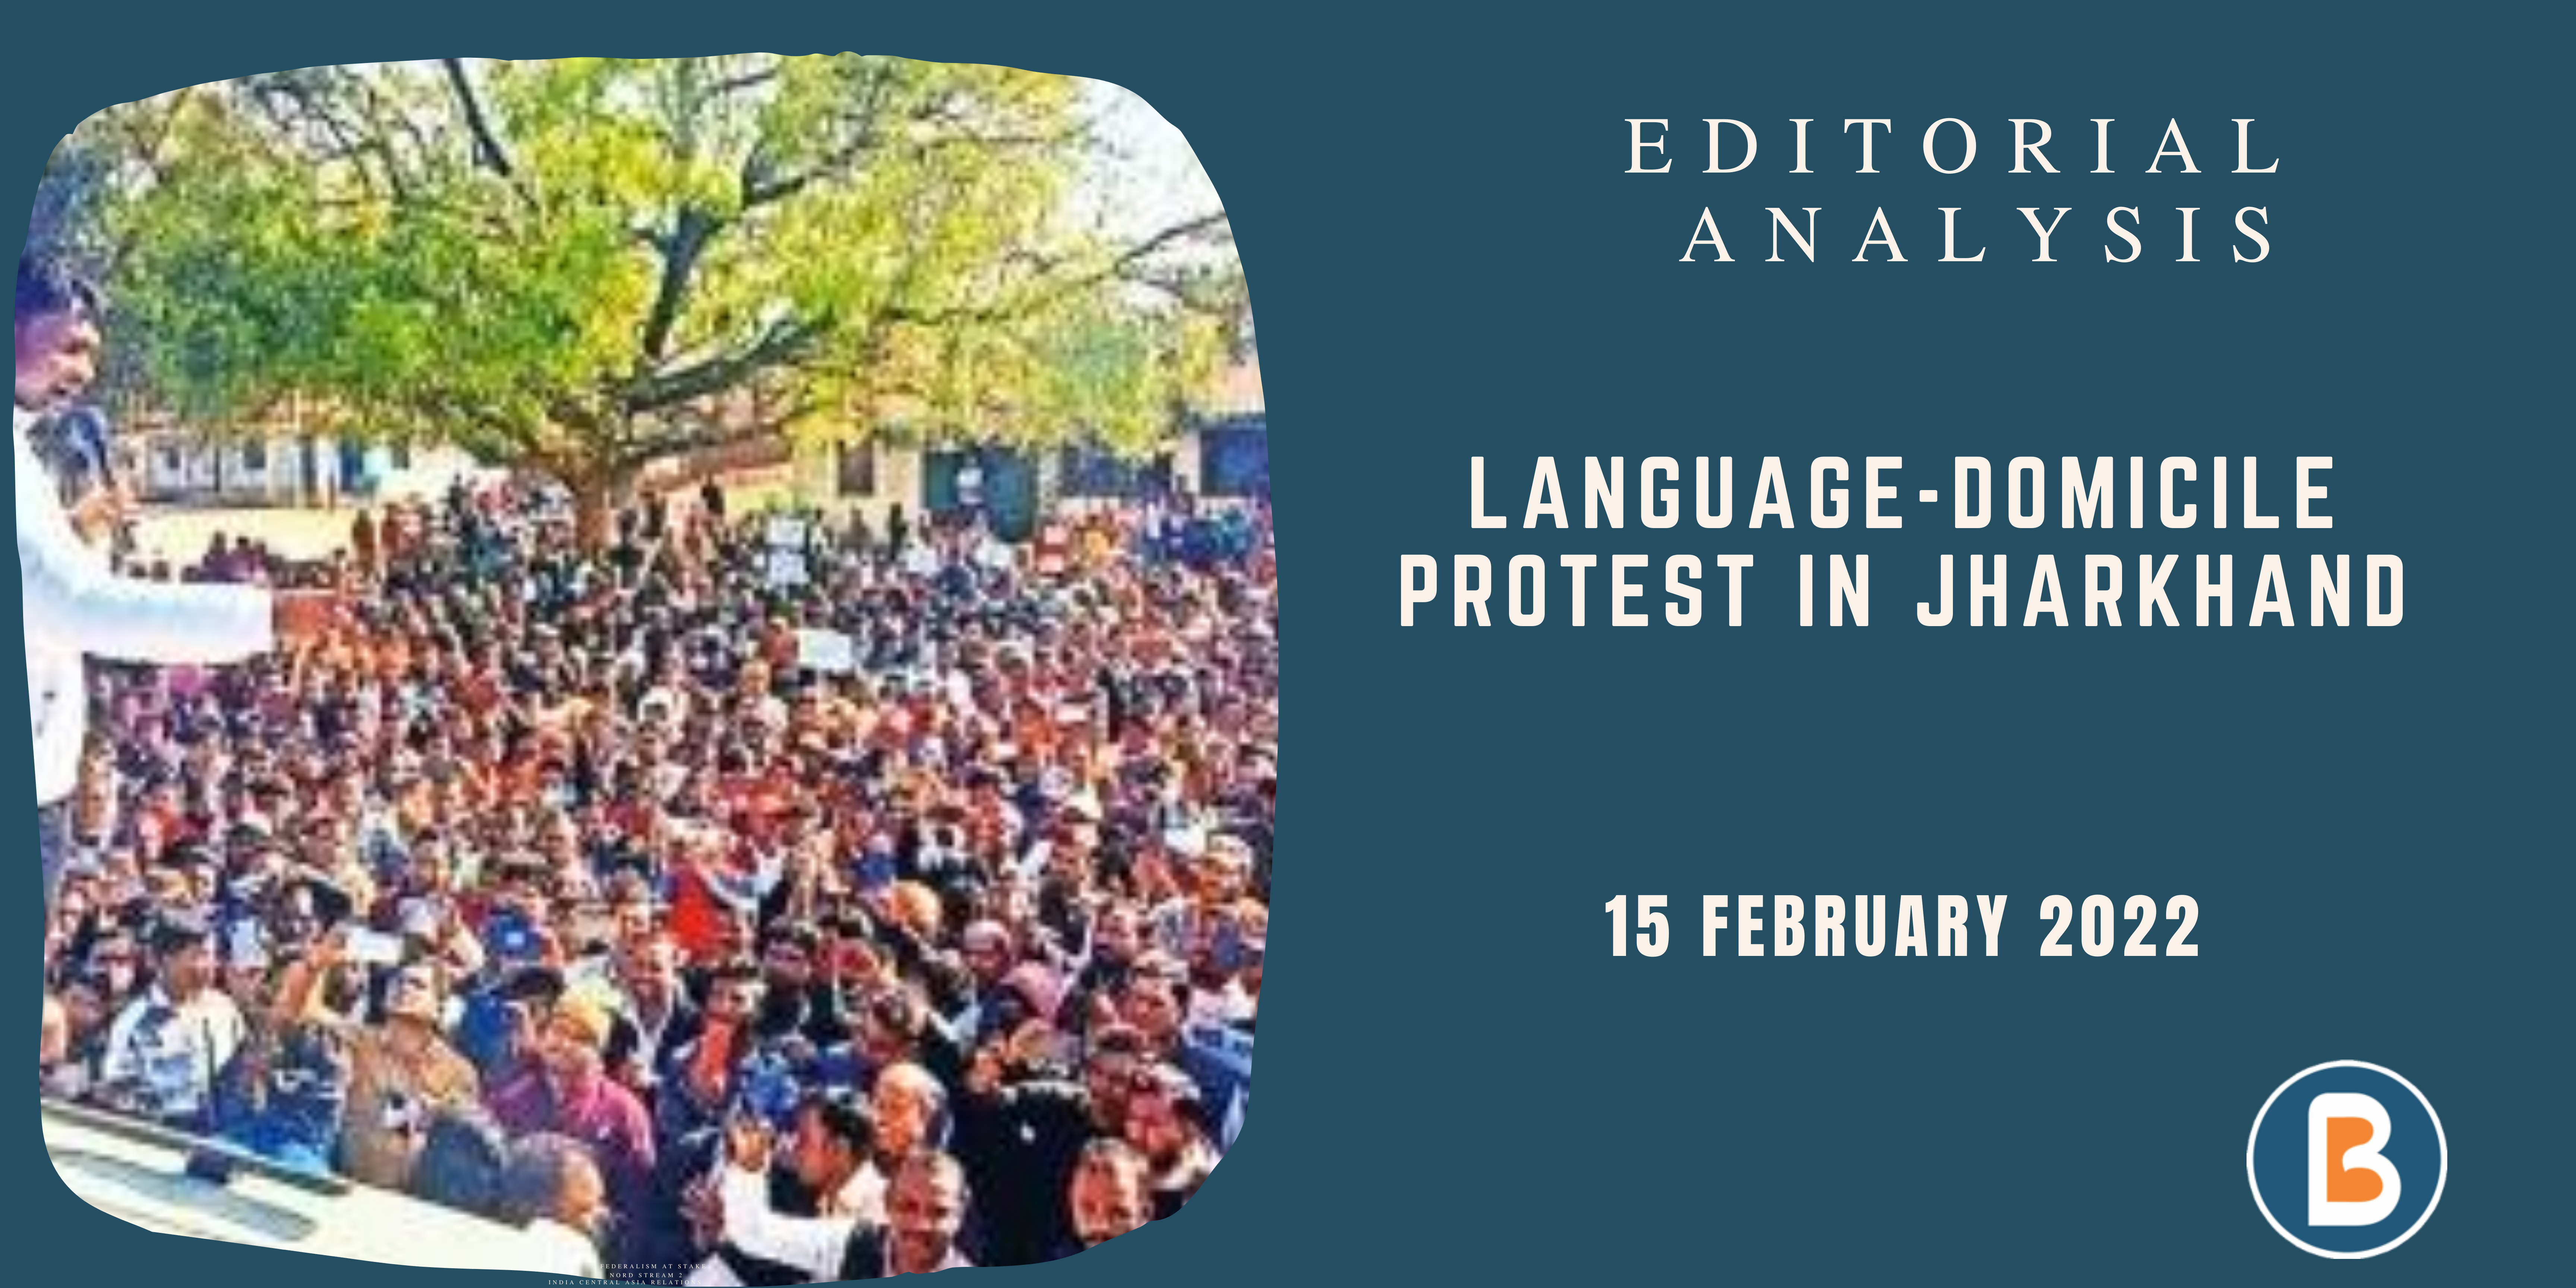 Editorial Analysis for Civil Services - Language - Domicile Protest in Jharkhand